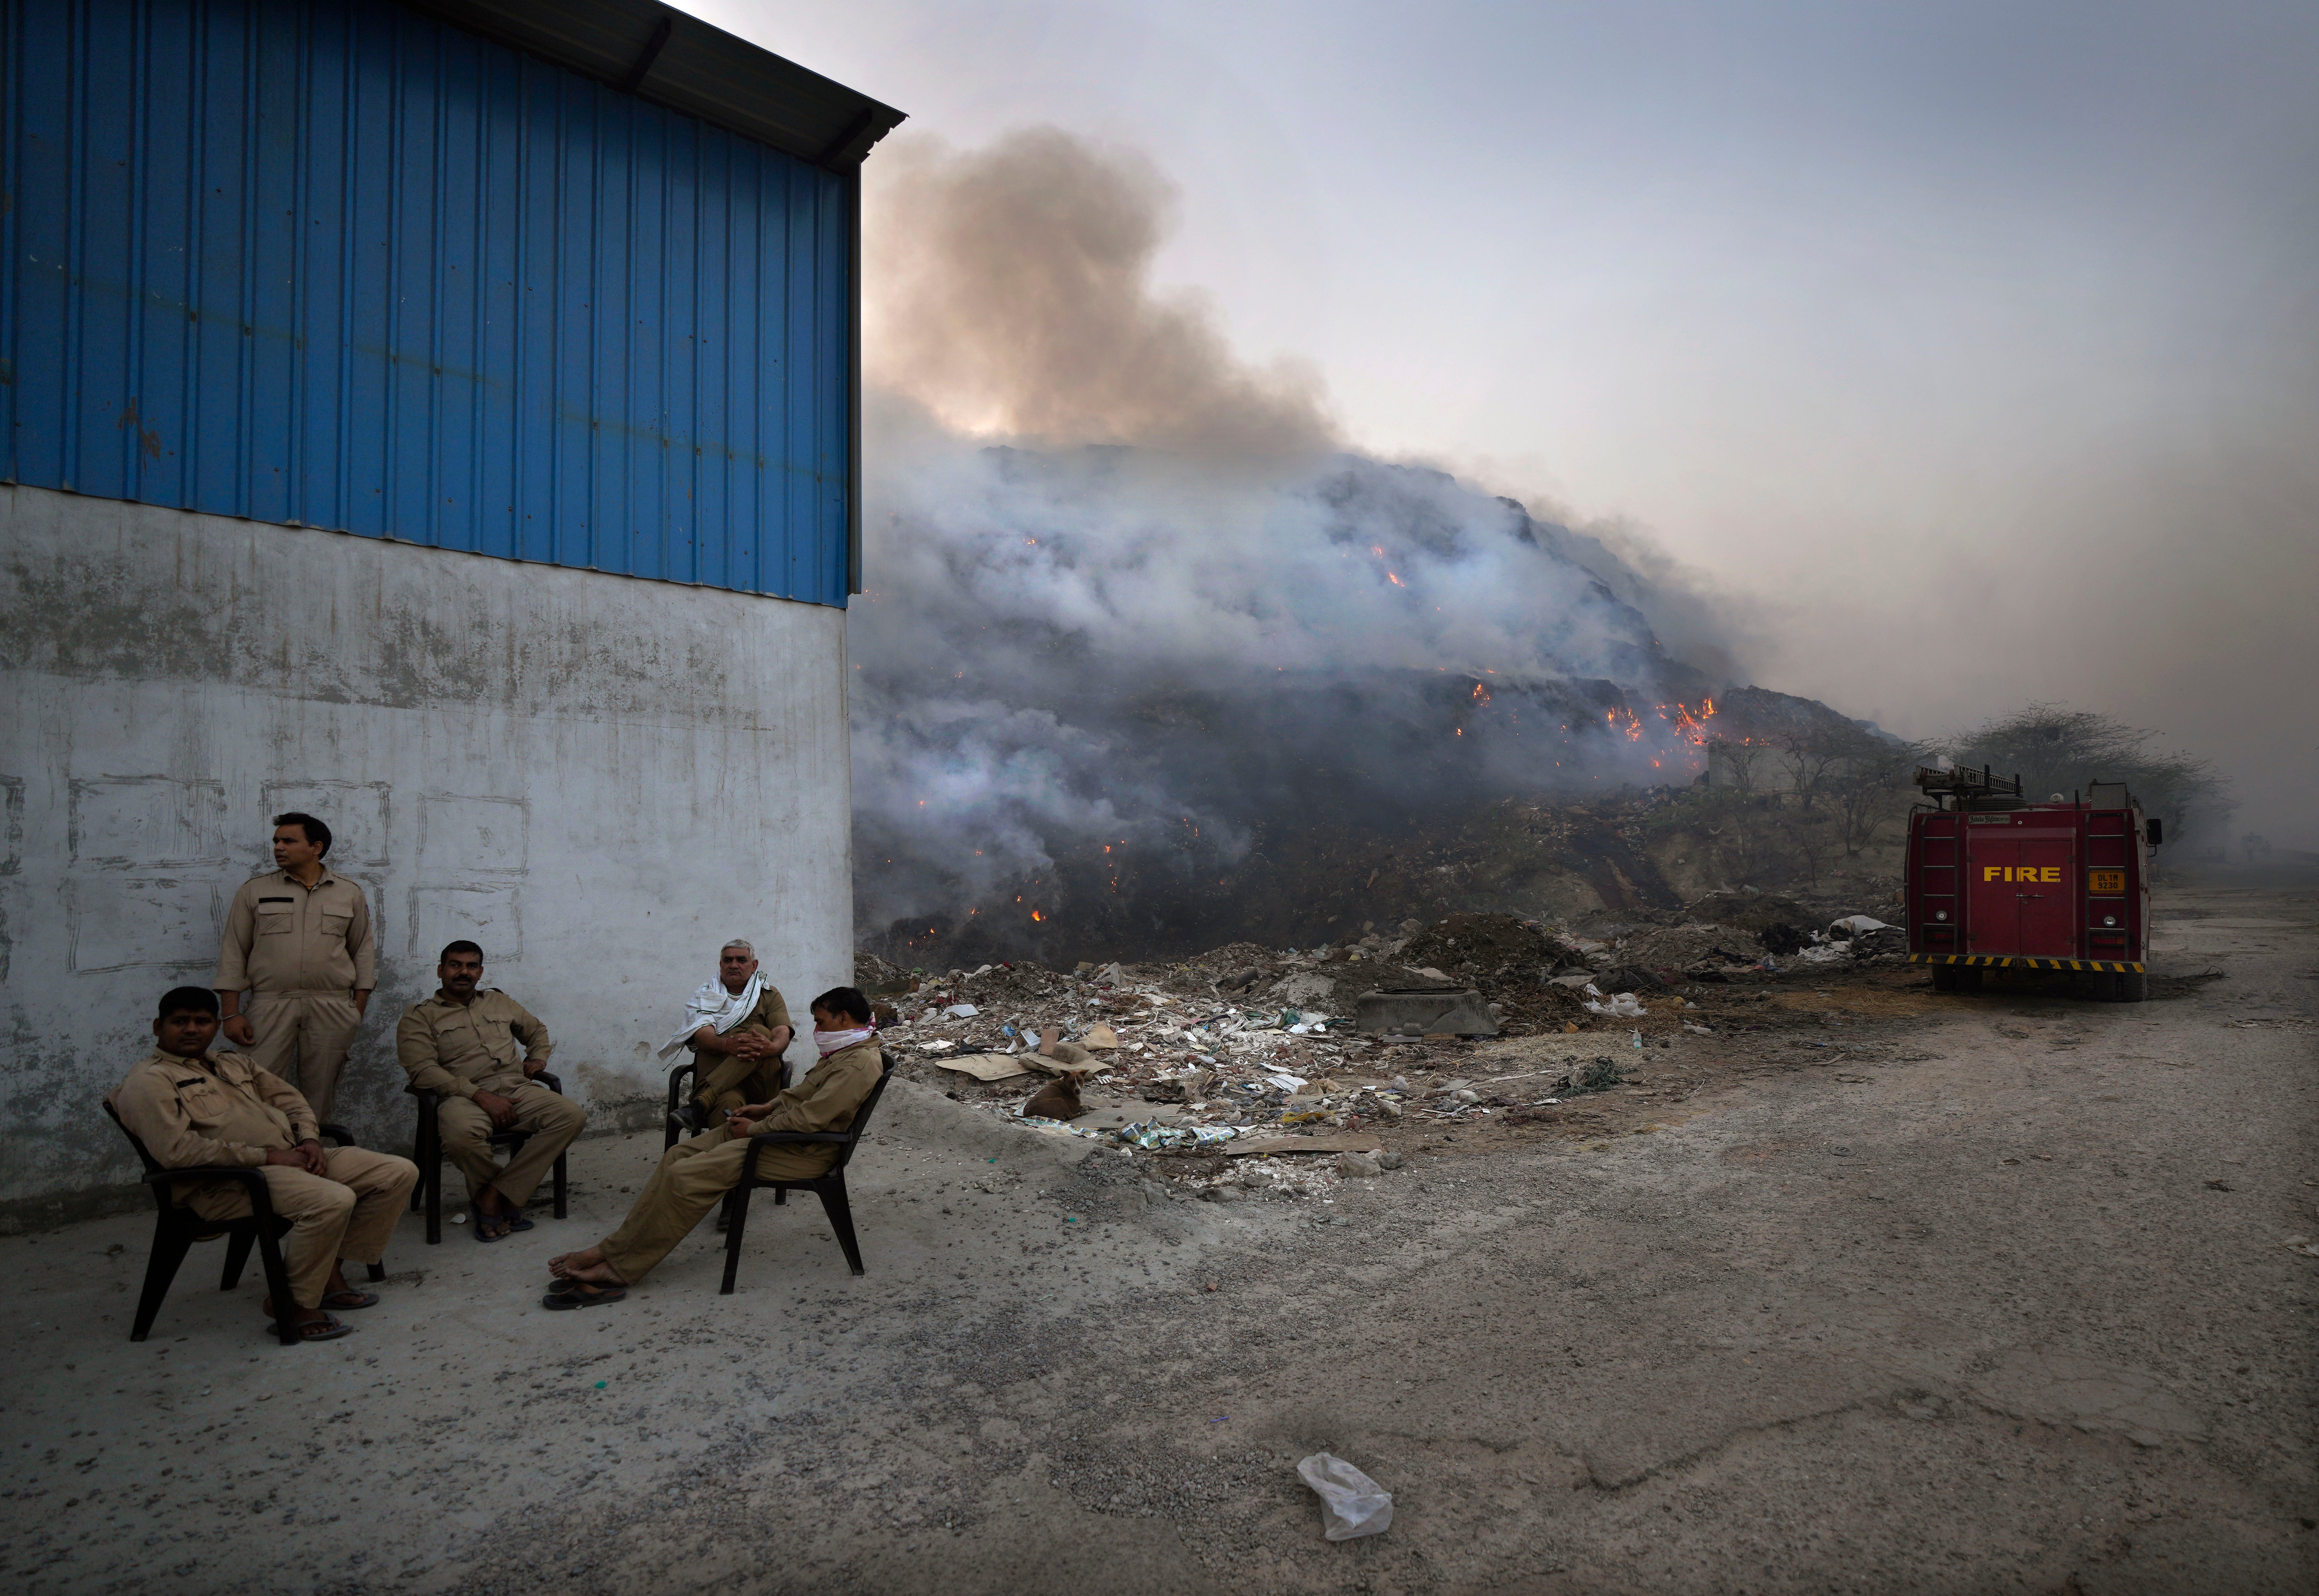 Delhi fire officials take a break while dousing a fire at the Bhalswa landfill in New Delhi on Wednesday.